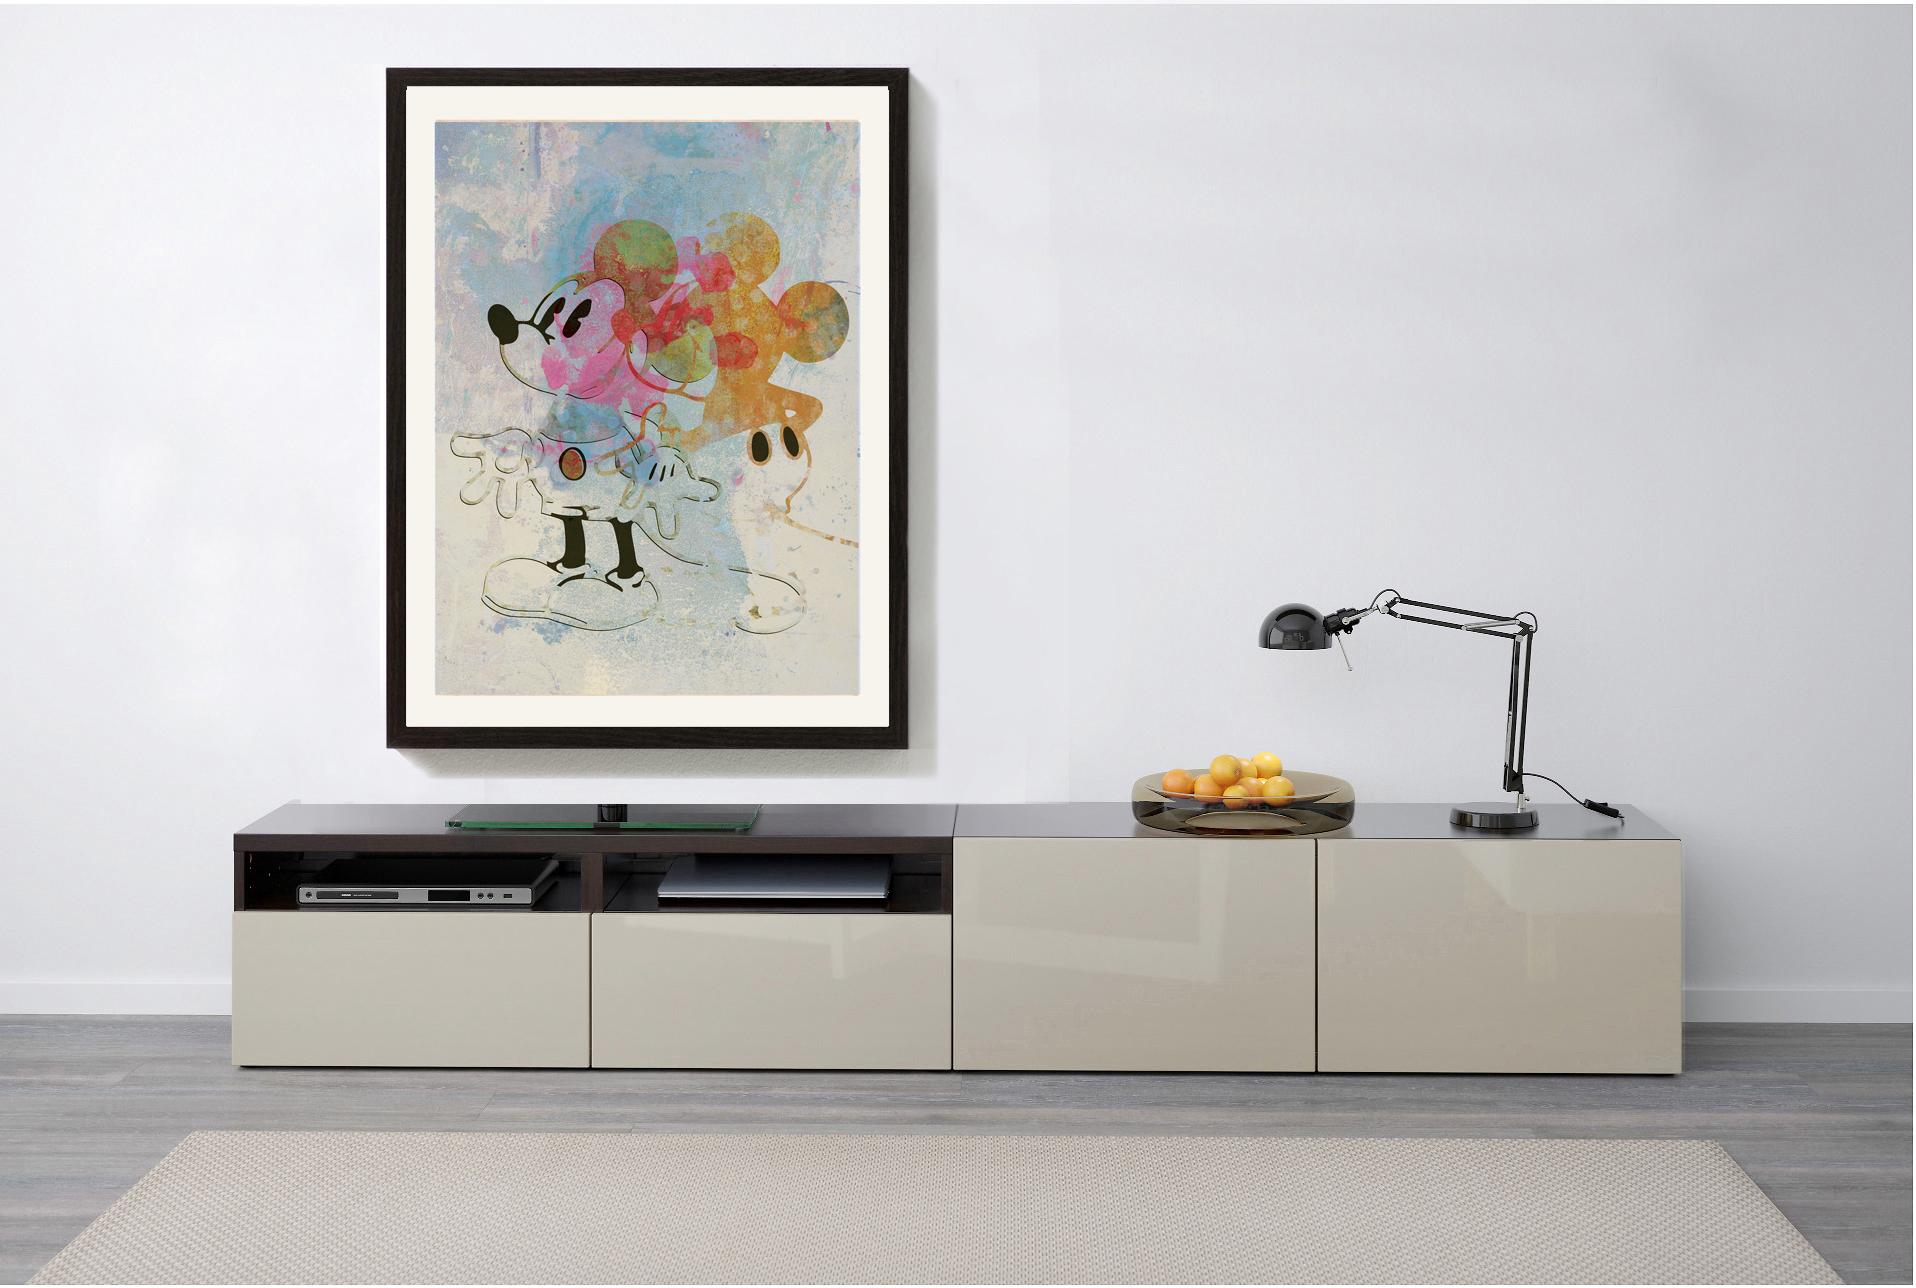 M011-Figurative, Street art, Pop art, Modern, Contemporary Abstract Mickey Mouse - Gray Figurative Print by Francisco Nicolás